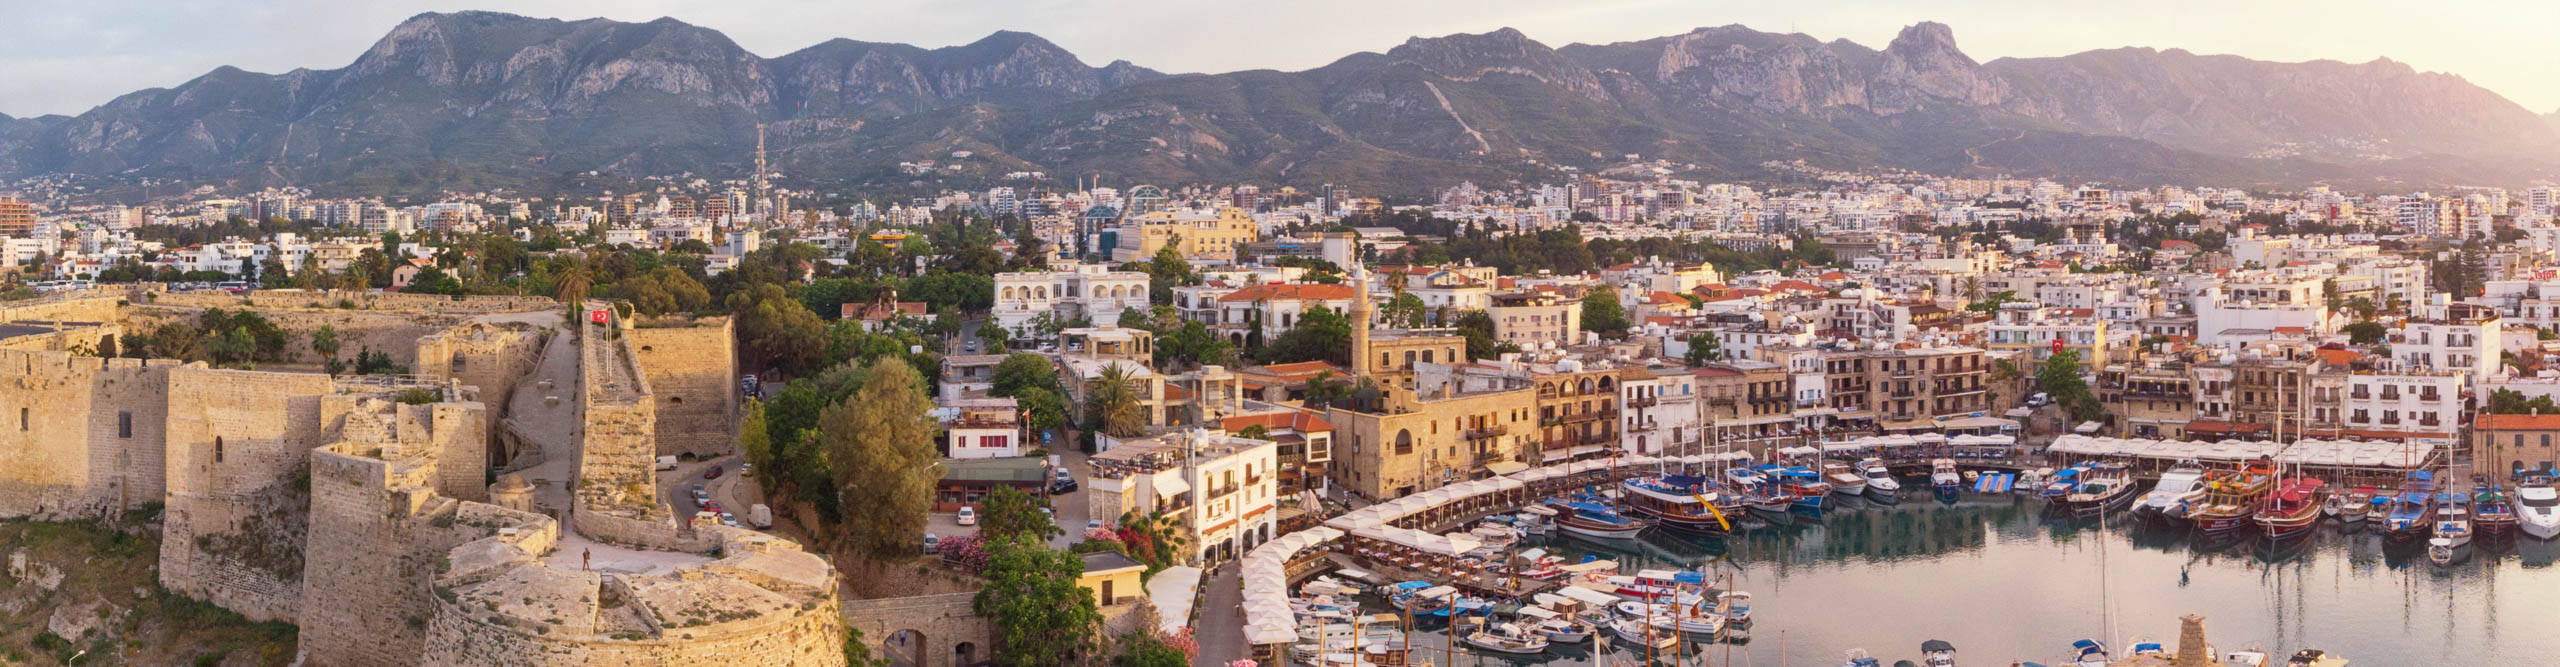 Kyreniam, known for its cobblestoned old town and horseshoe-shaped harbor at dusk, northern Cyprus 